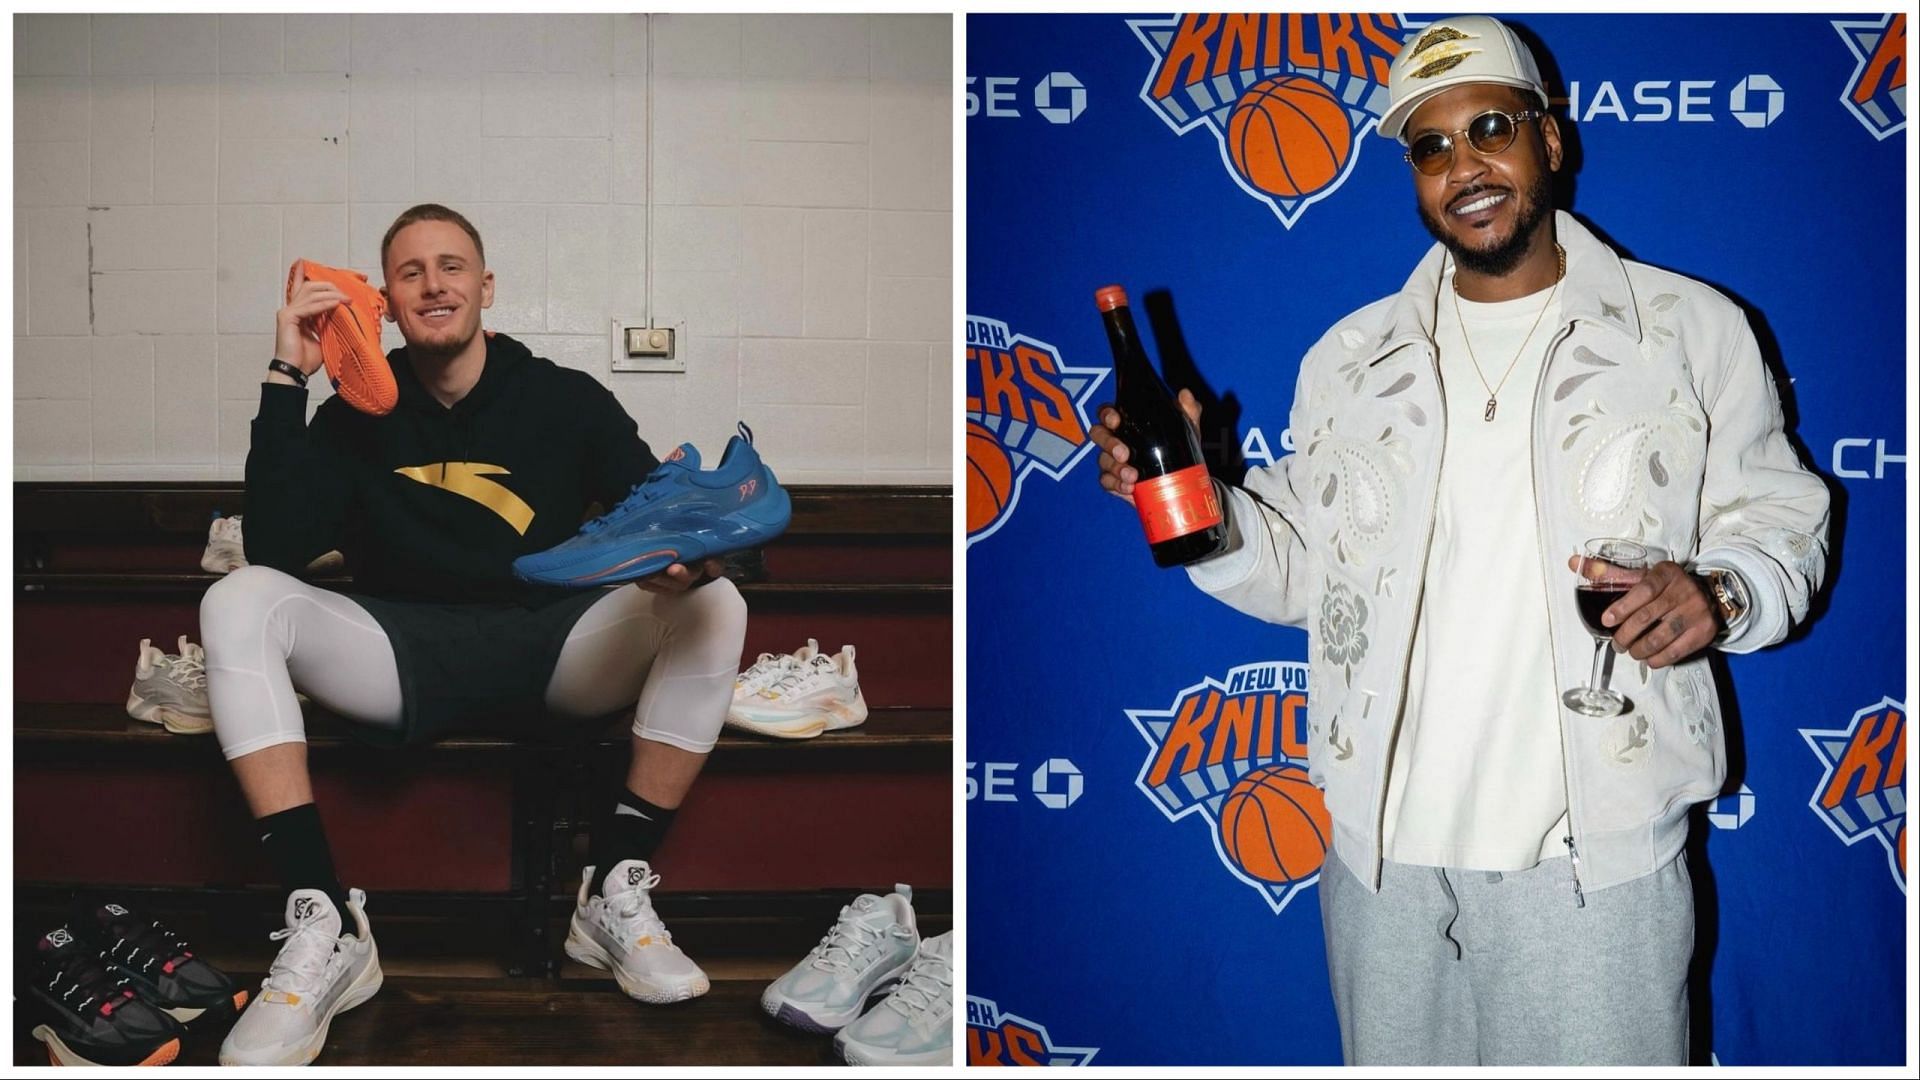 Carmelo Anthony gives approval with salute emoji to Donte DiVincenzo